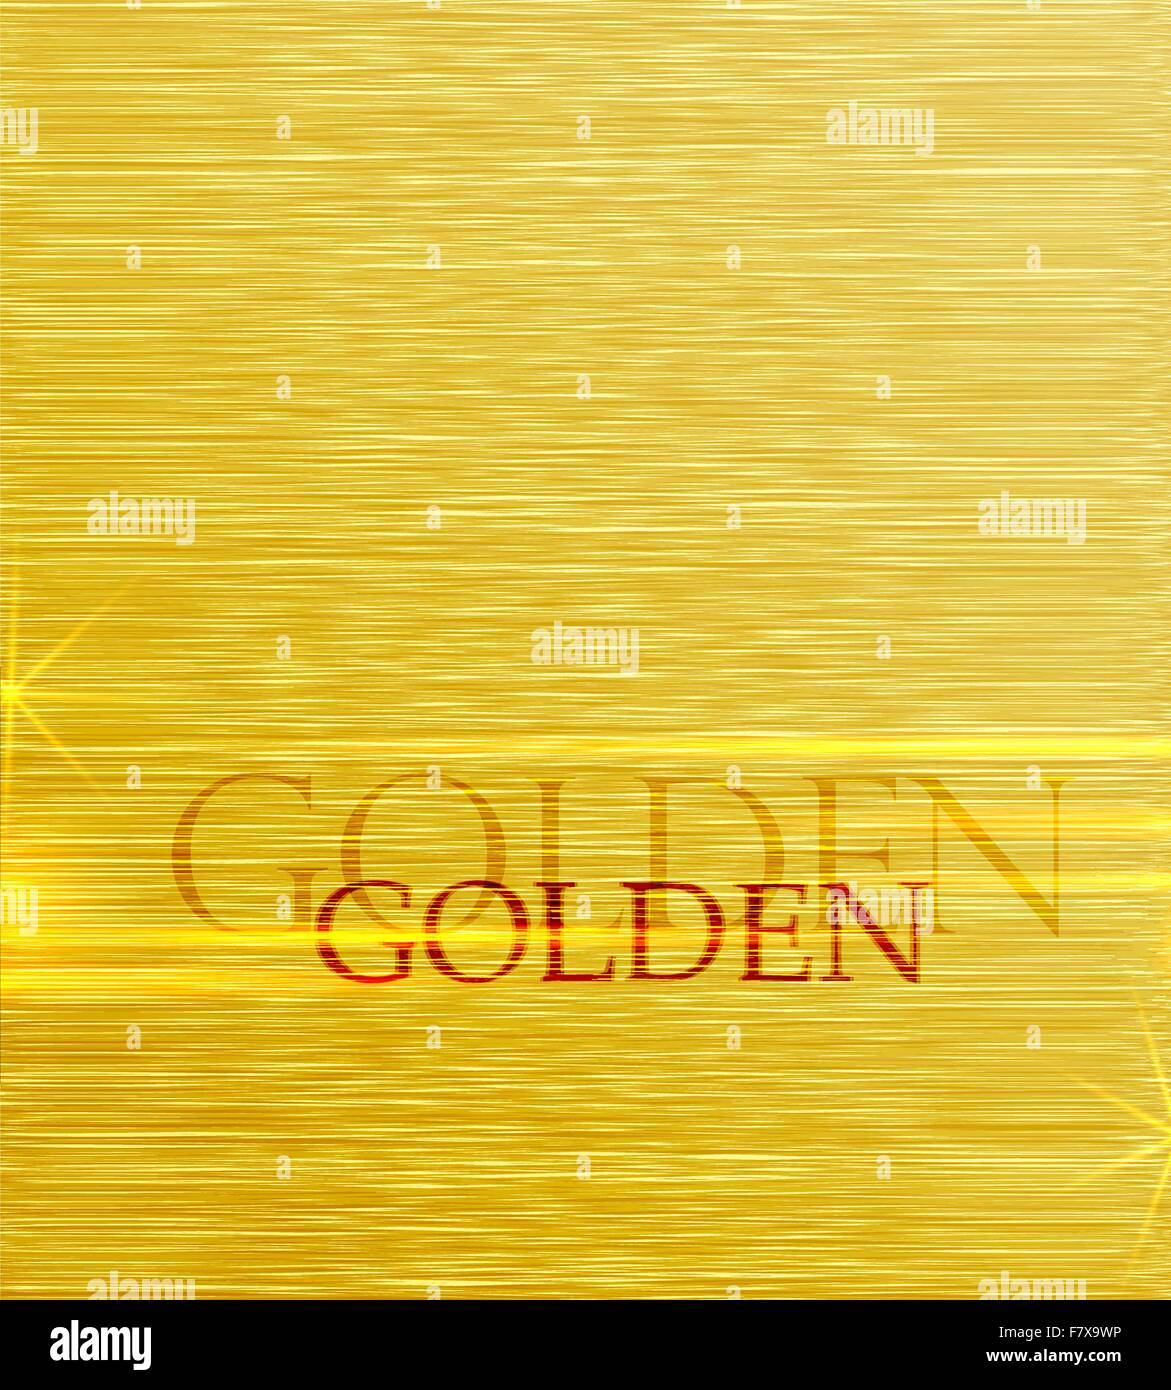 Background Gold Stock Vector